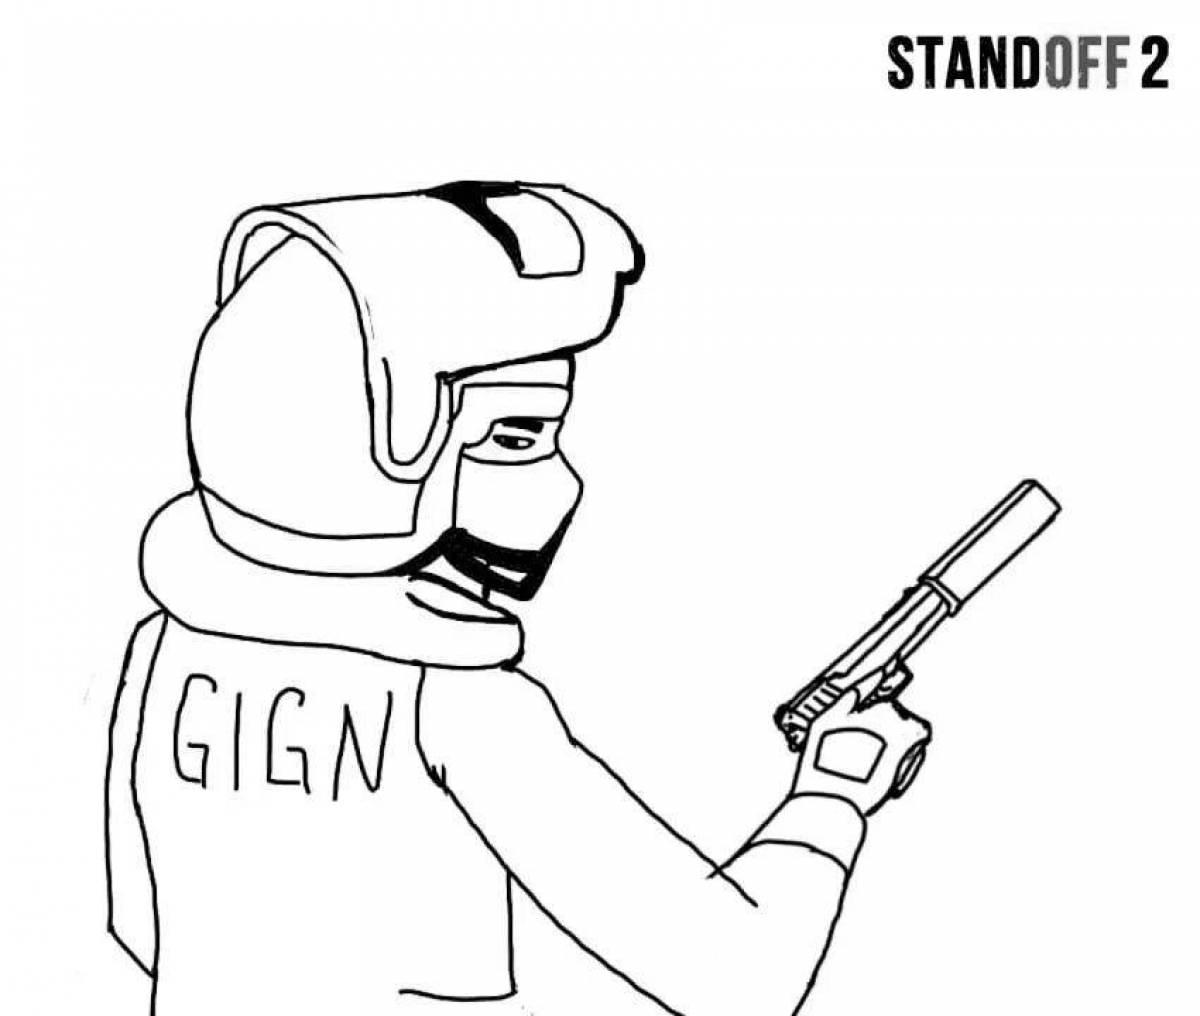 Fancy coloring standoff2